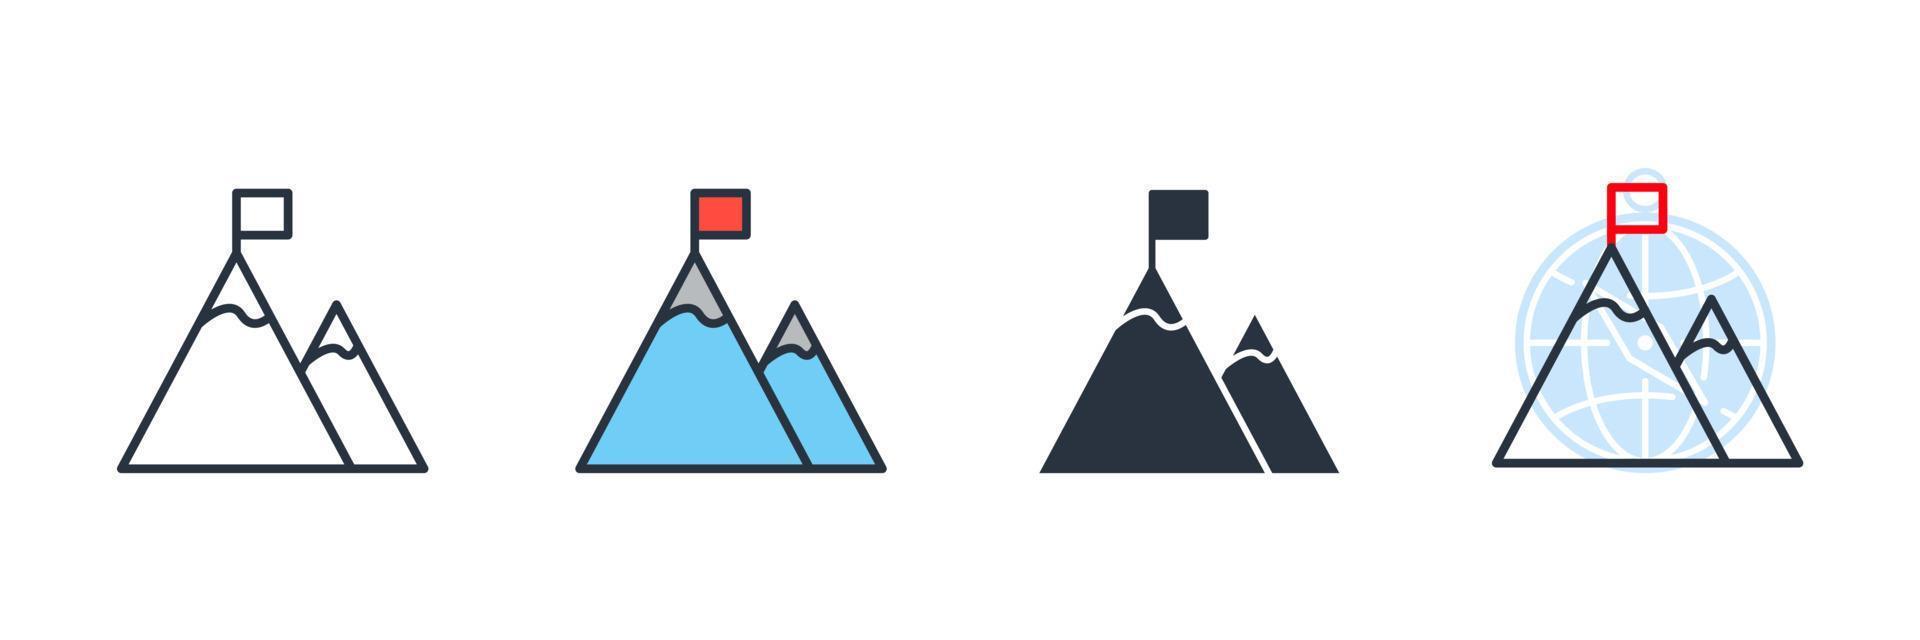 mountain icon logo vector illustration. mountain with a flag symbol template for graphic and web design collection